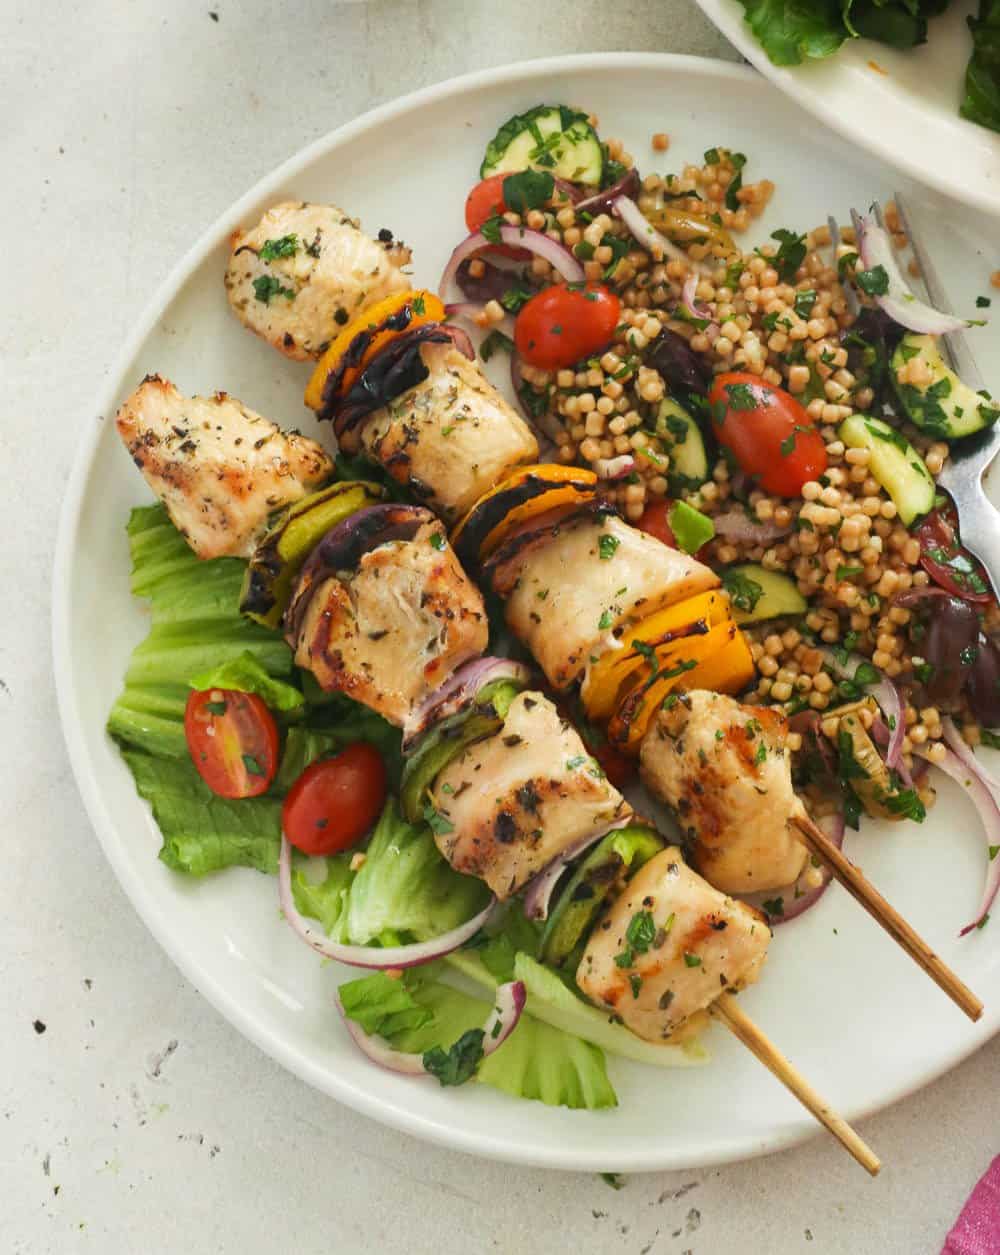 Two chicken kabobs on a plate with couscous